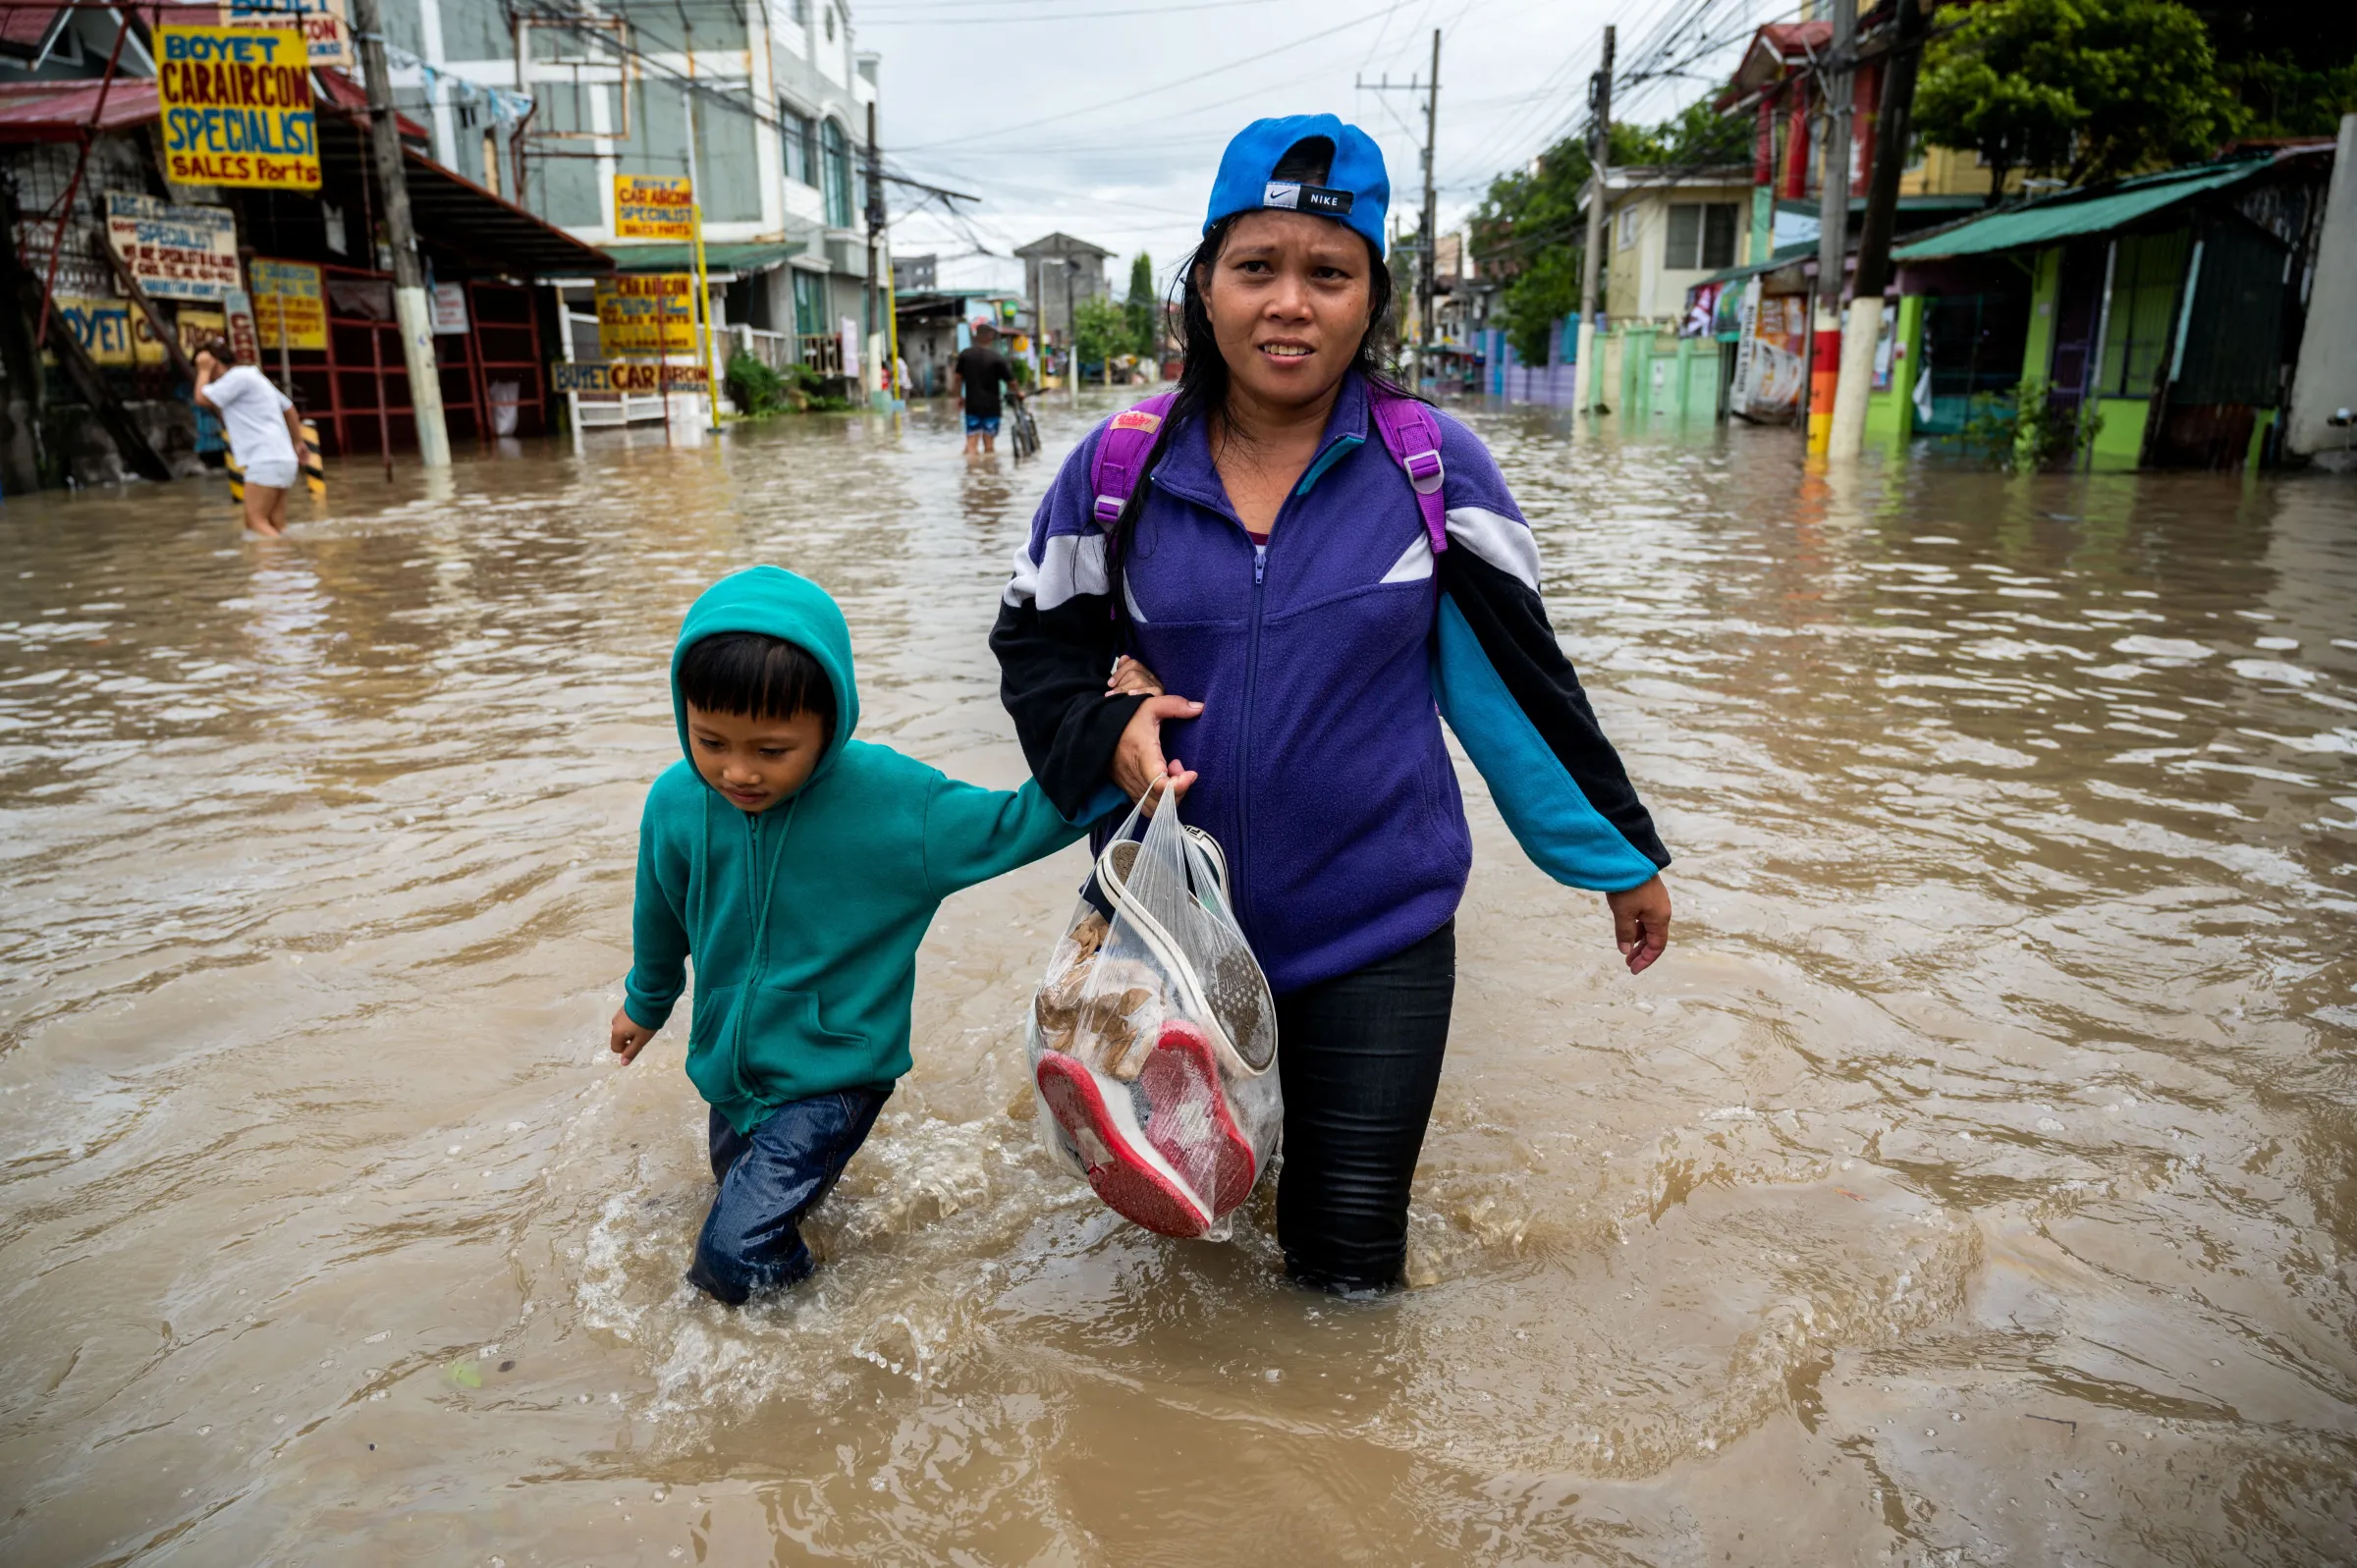 A mother and a child wade through a flooded street following heavy rains brought by Tropical Storm Nalgae, in Kawit, Cavite province, Philippines, October 30, 2022